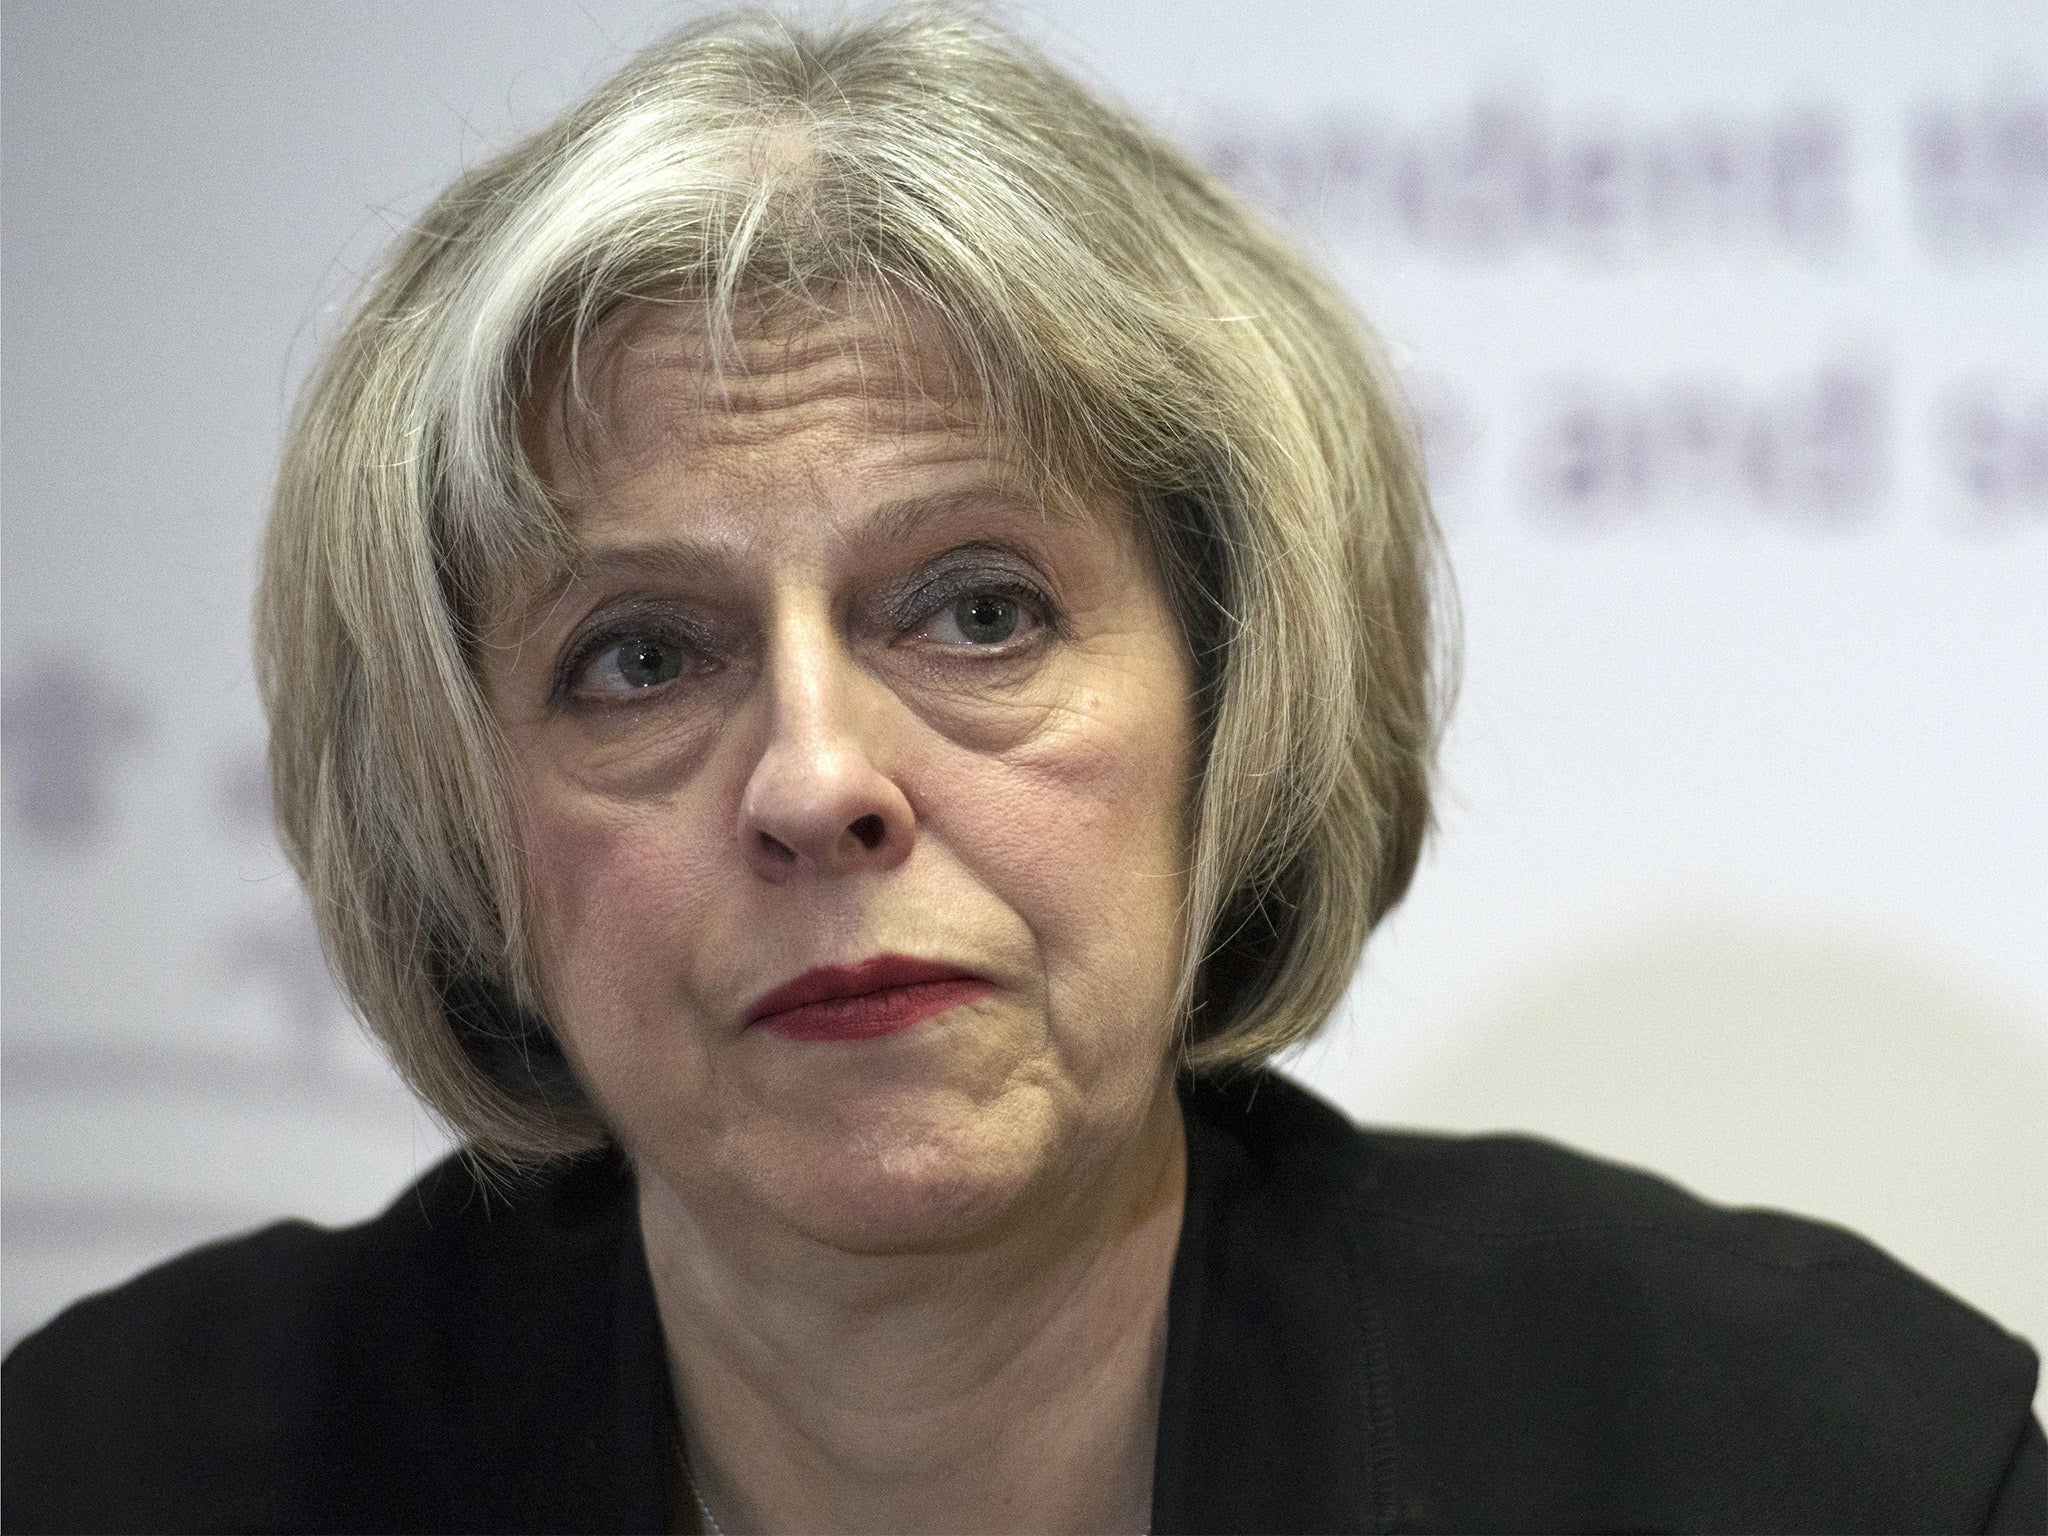 Home Secretary Theresa May will chair the emergency Cobra meeting today